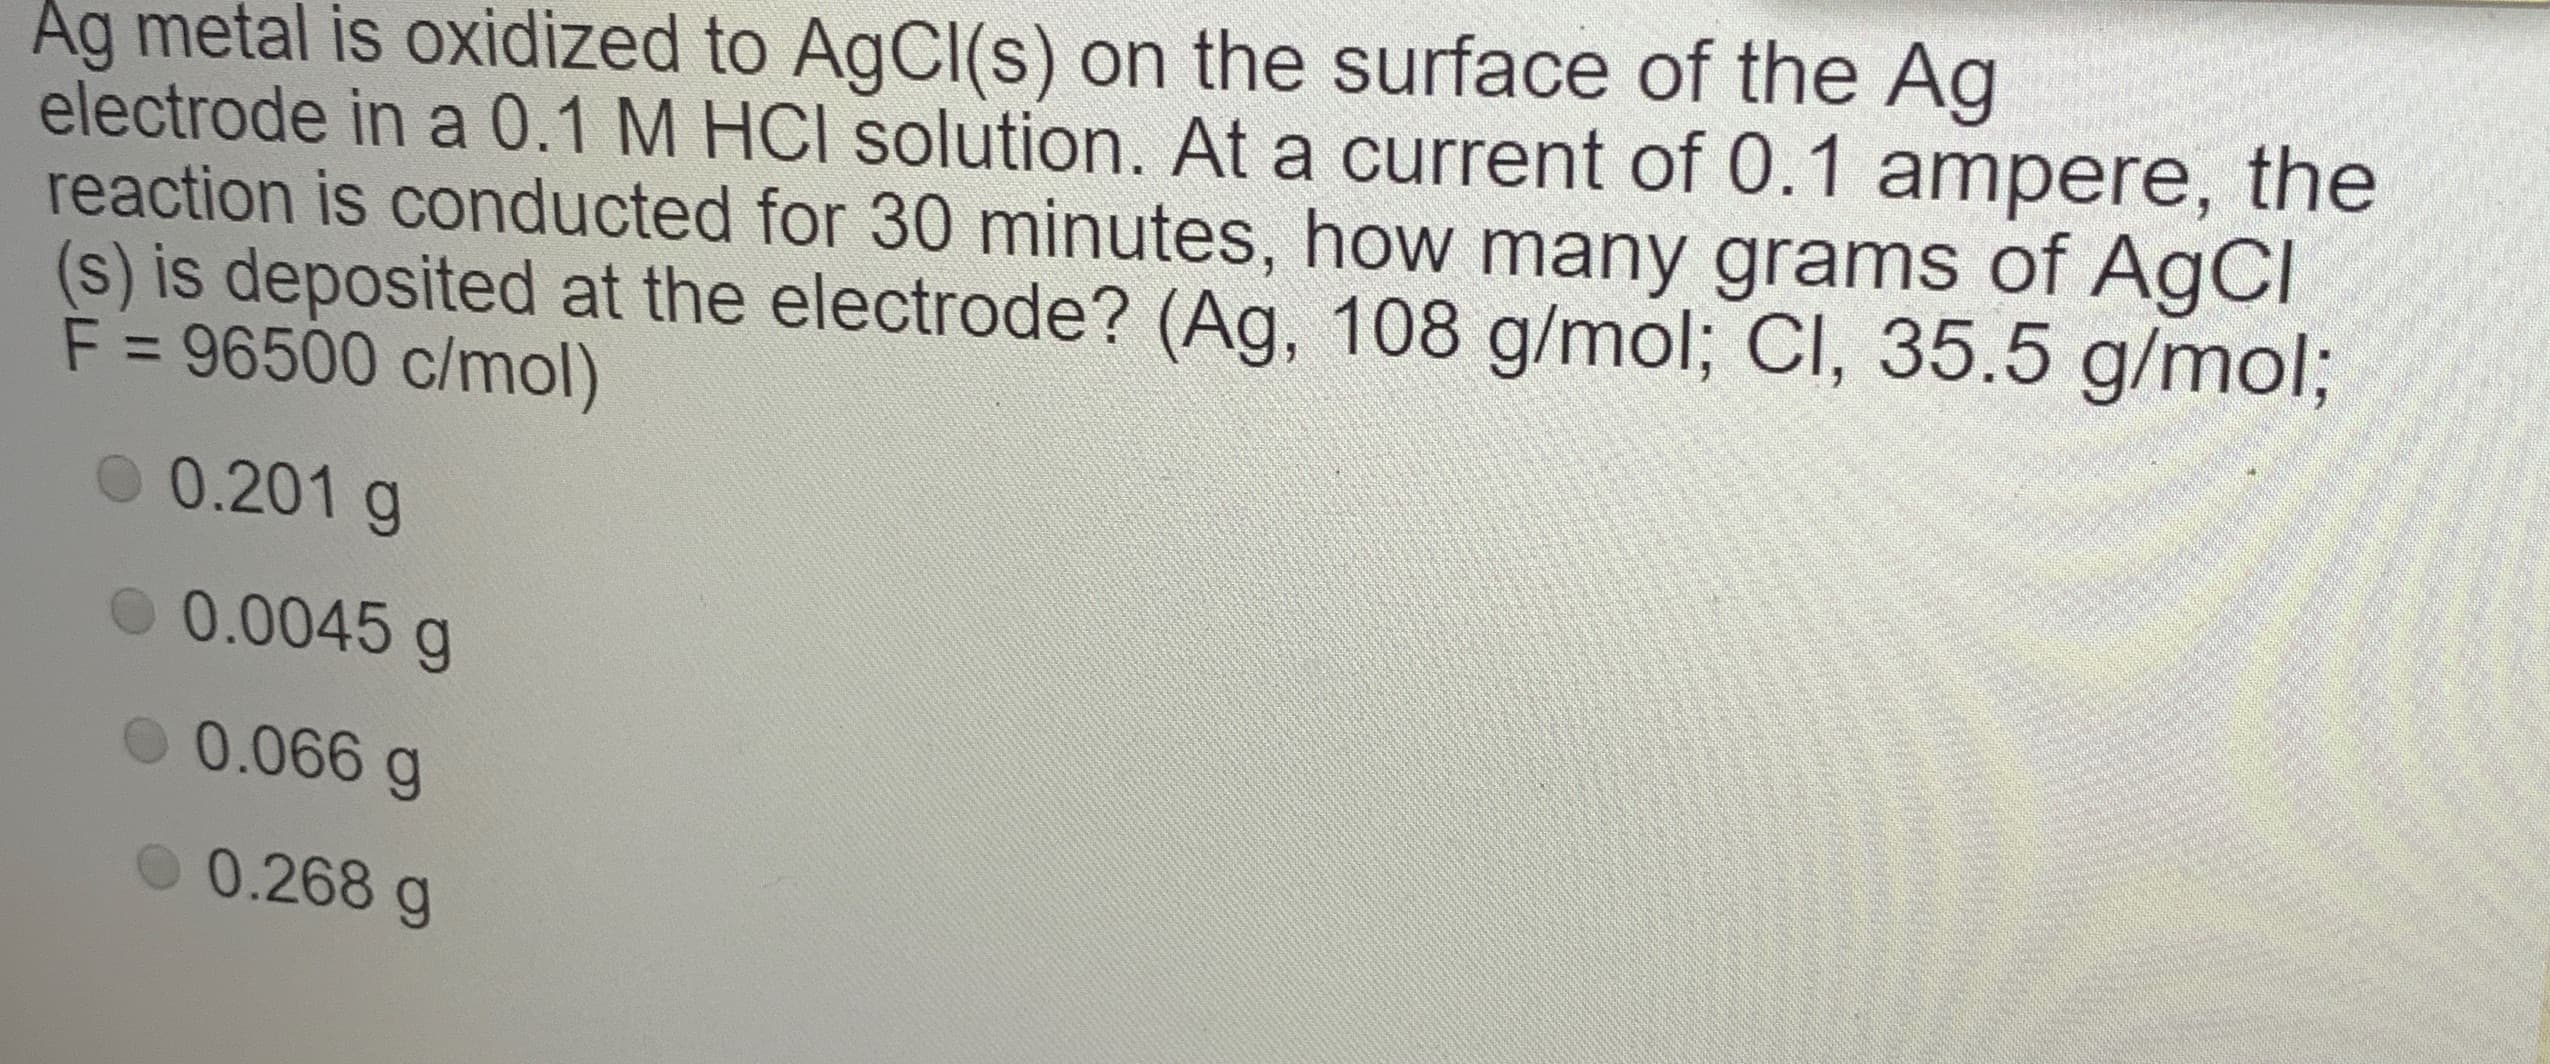 Ağ metal is oxidized to AgCI(s) on the surface of the Ag
electrode in a 0.1 M HCI solution. At a current of 0.1 ampere, the
reaction is conducted for 30 minutes, how many grams of AgCl
(s) is deposited at the electrode? (Ag, 108 g/mol; Cl, 35.5 g/mol%3B
F = 96500 c/mol)
%3D
0 0.201 g
O 0.0045 g
0 0.066 g
0.268 g
